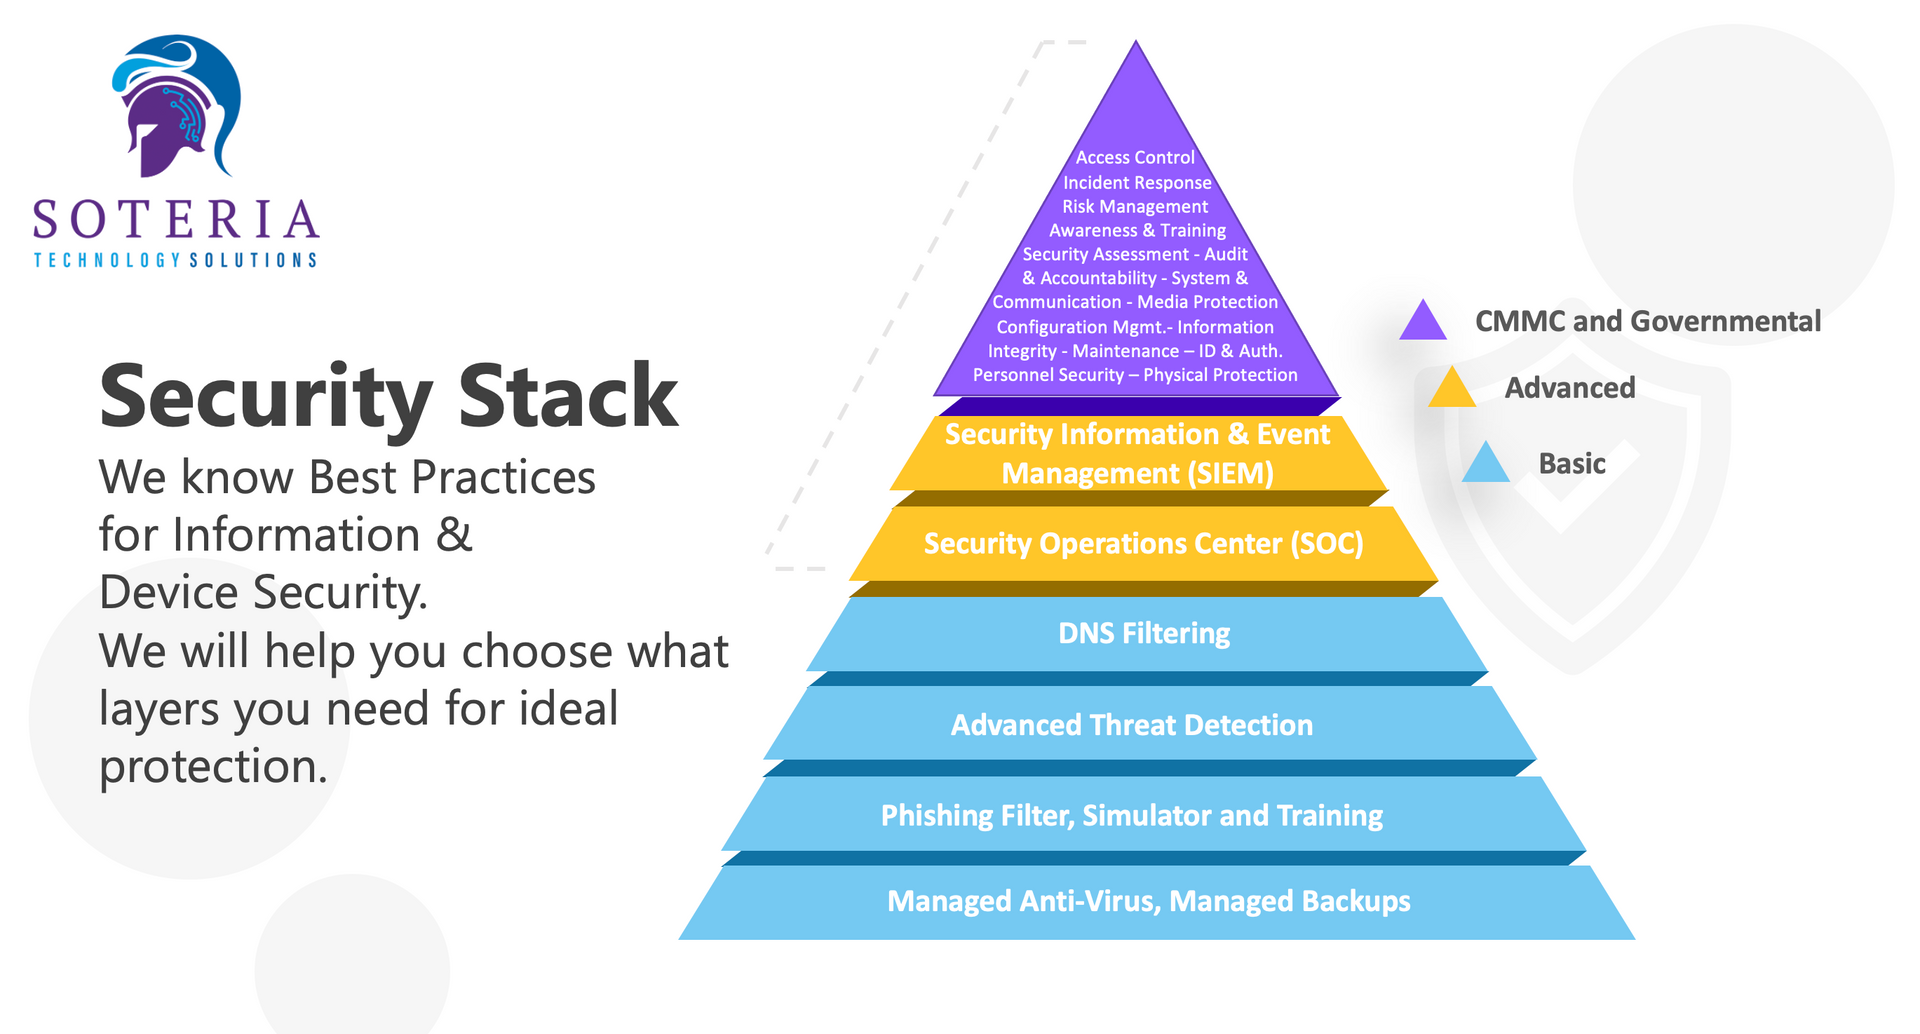 A pyramid illustration, with each layer going up is an increasingly advanced cybersecurity tool.